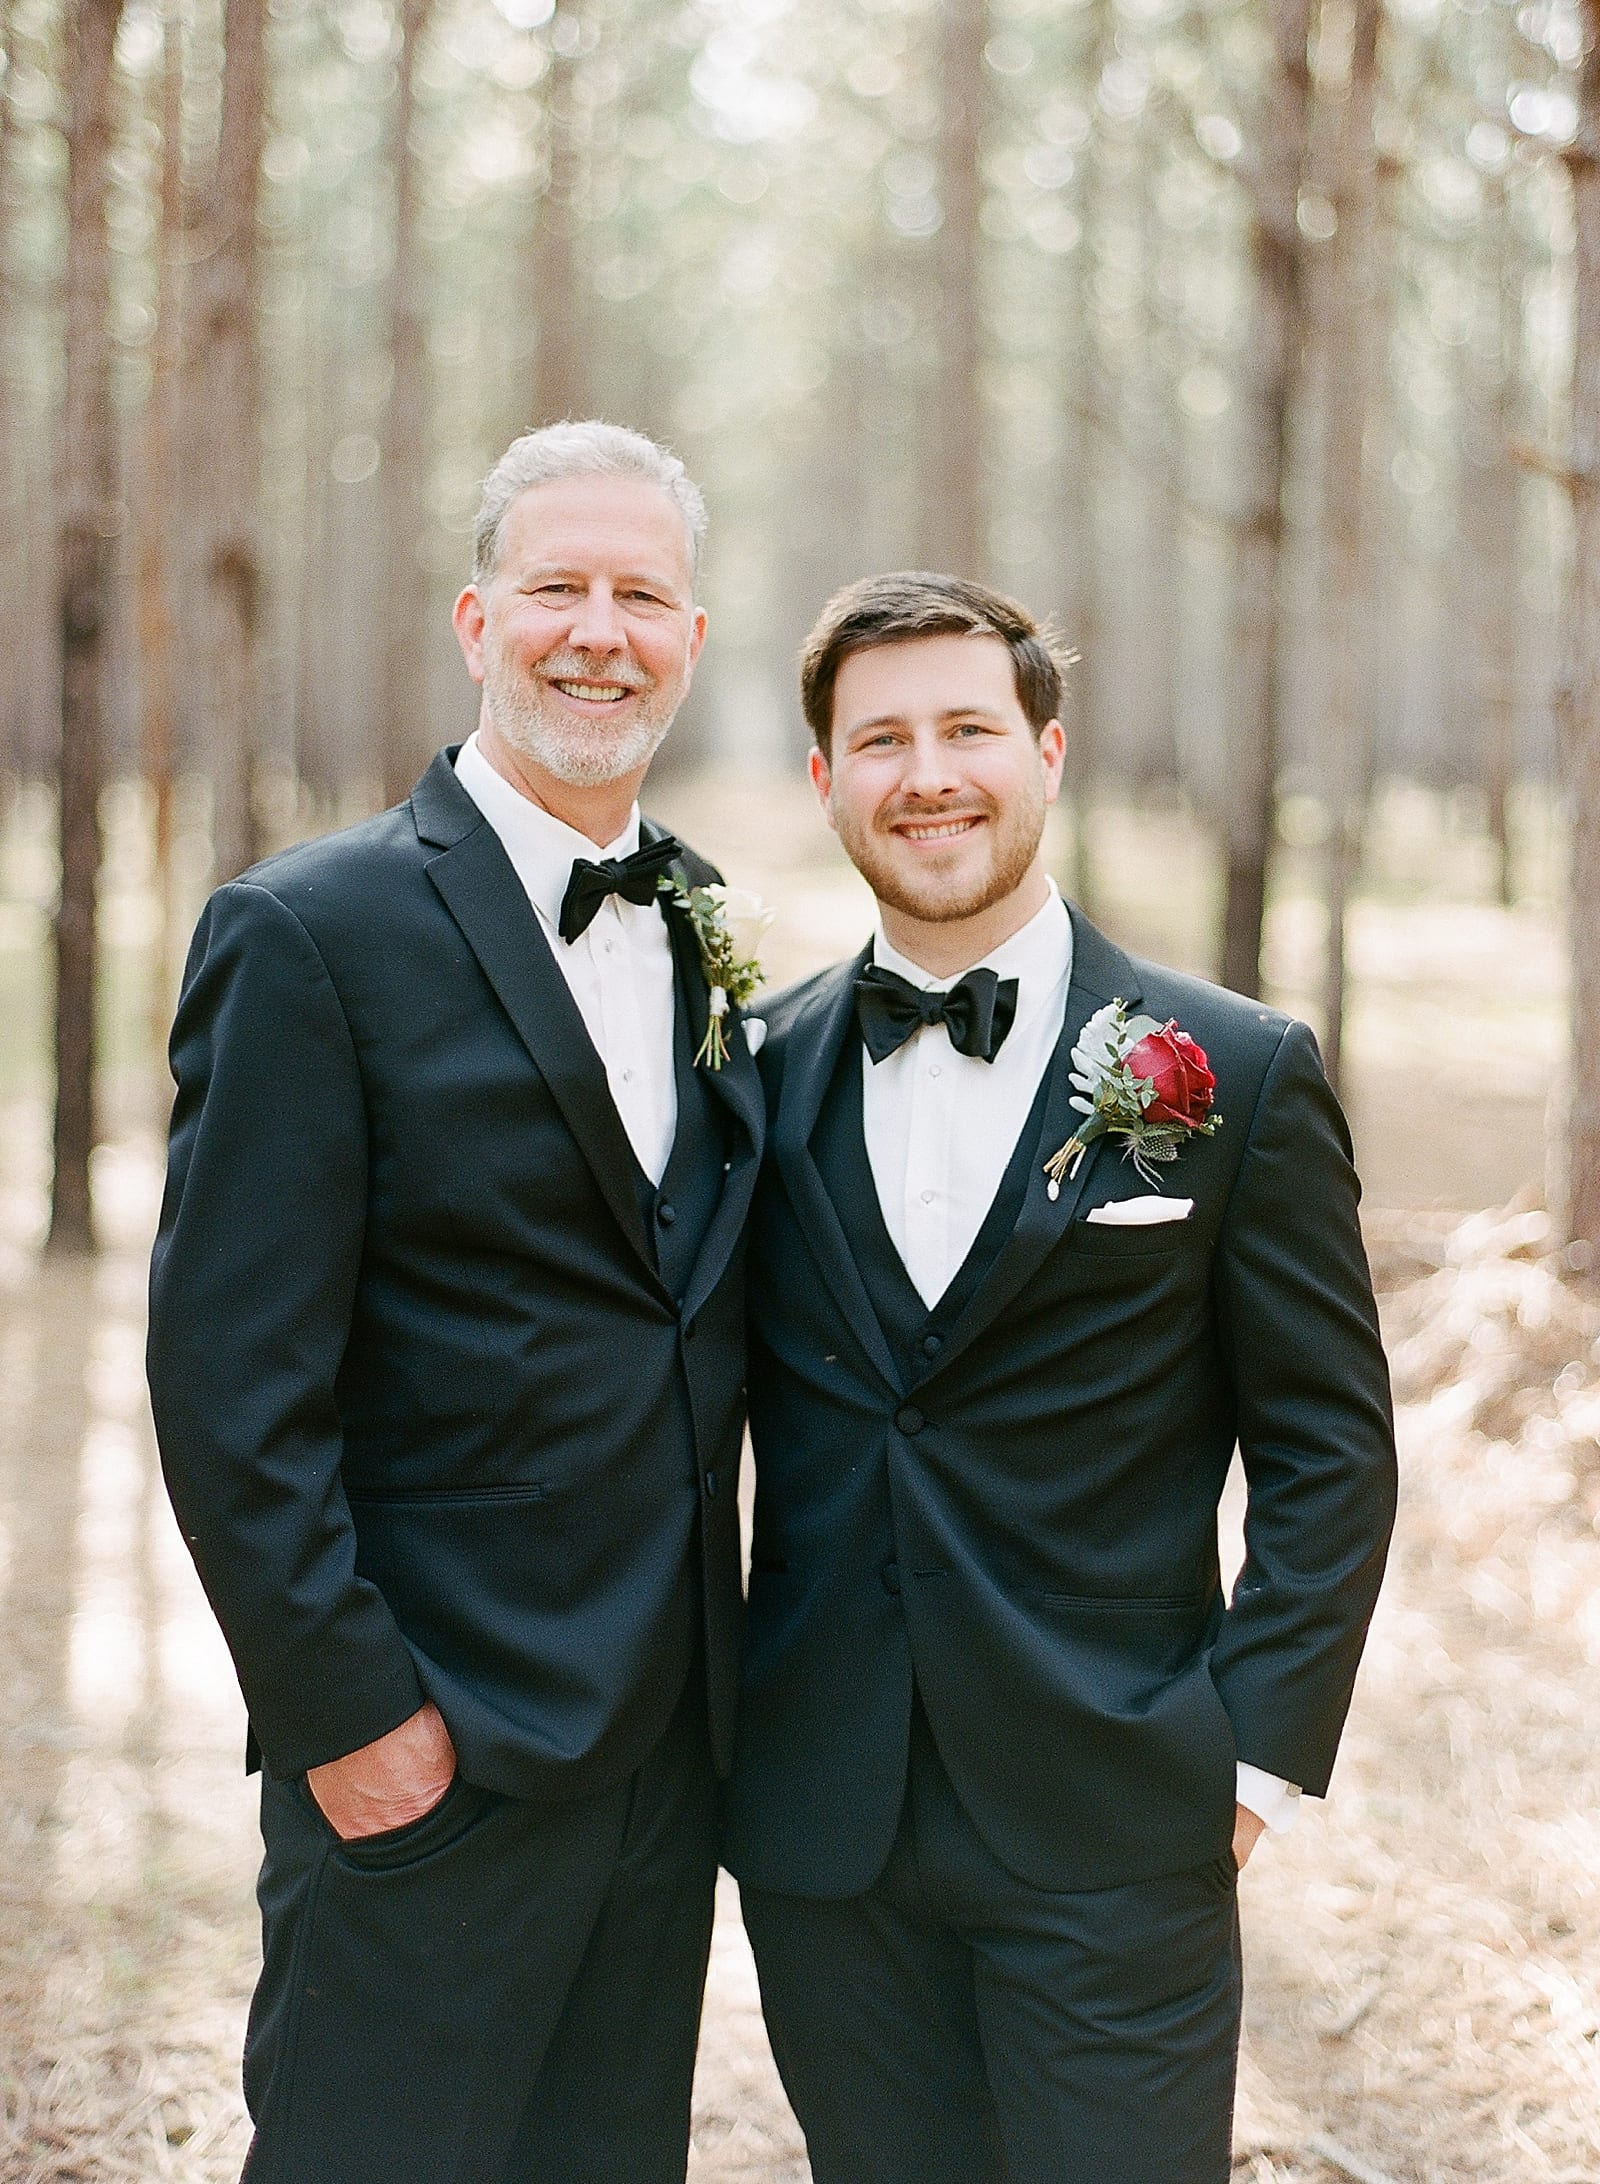 Groom and Best Man Smiling at Camera Photo